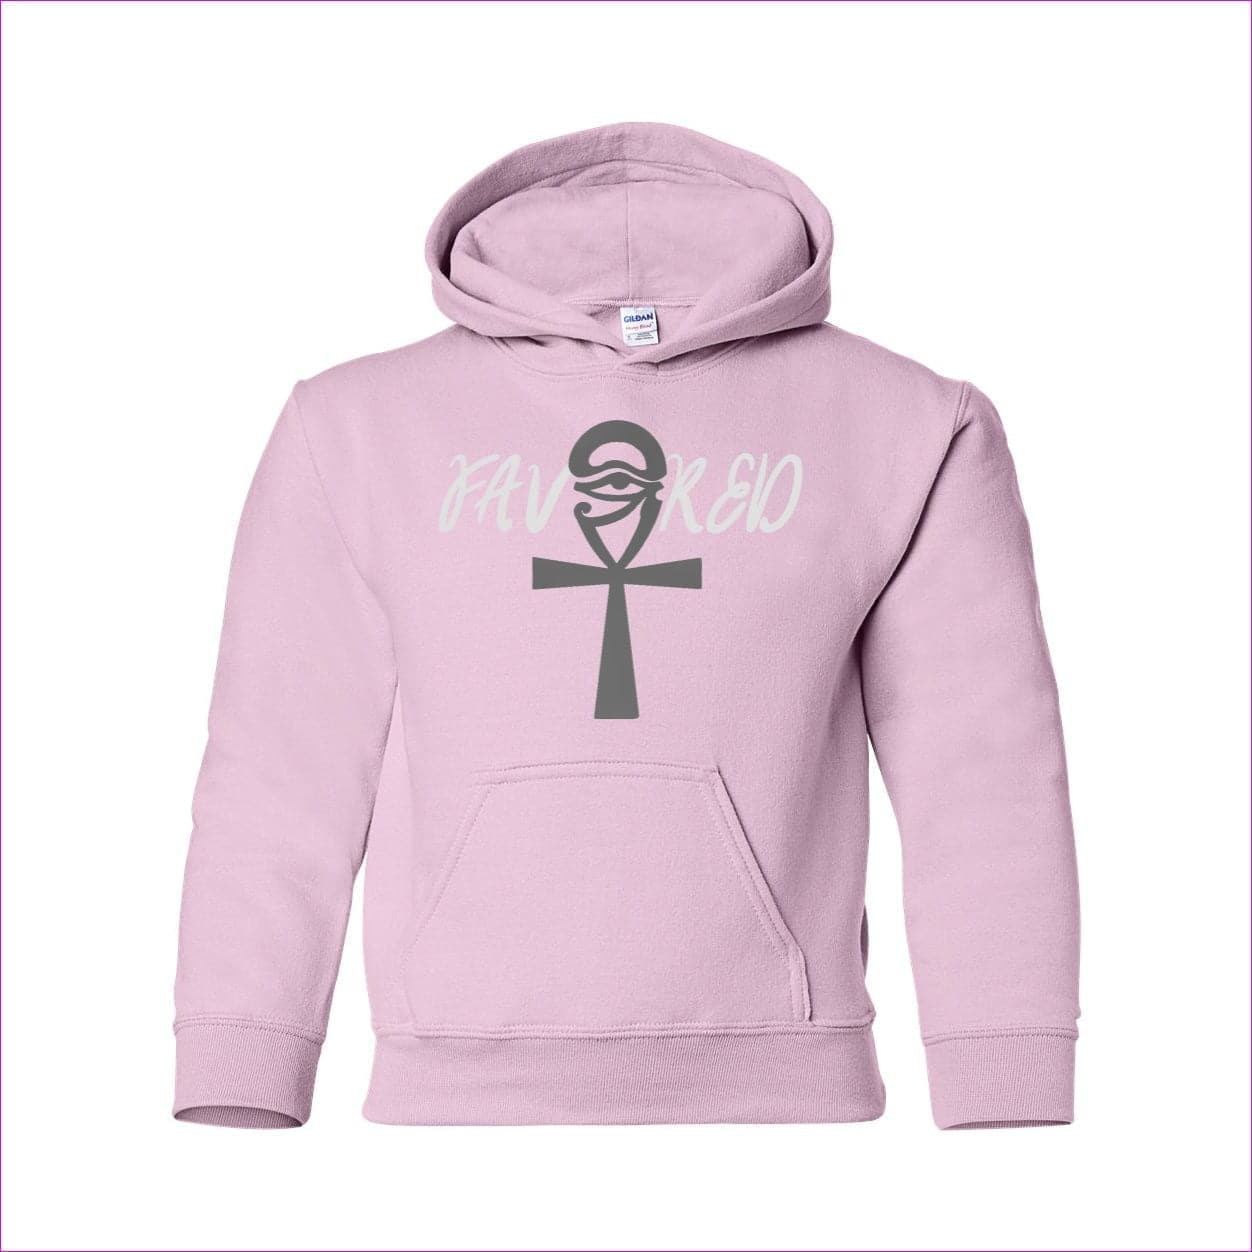 Light Pink - Favored Heavy Blend Youth Hooded Sweatshirt - kids hoodie at TFC&H Co.